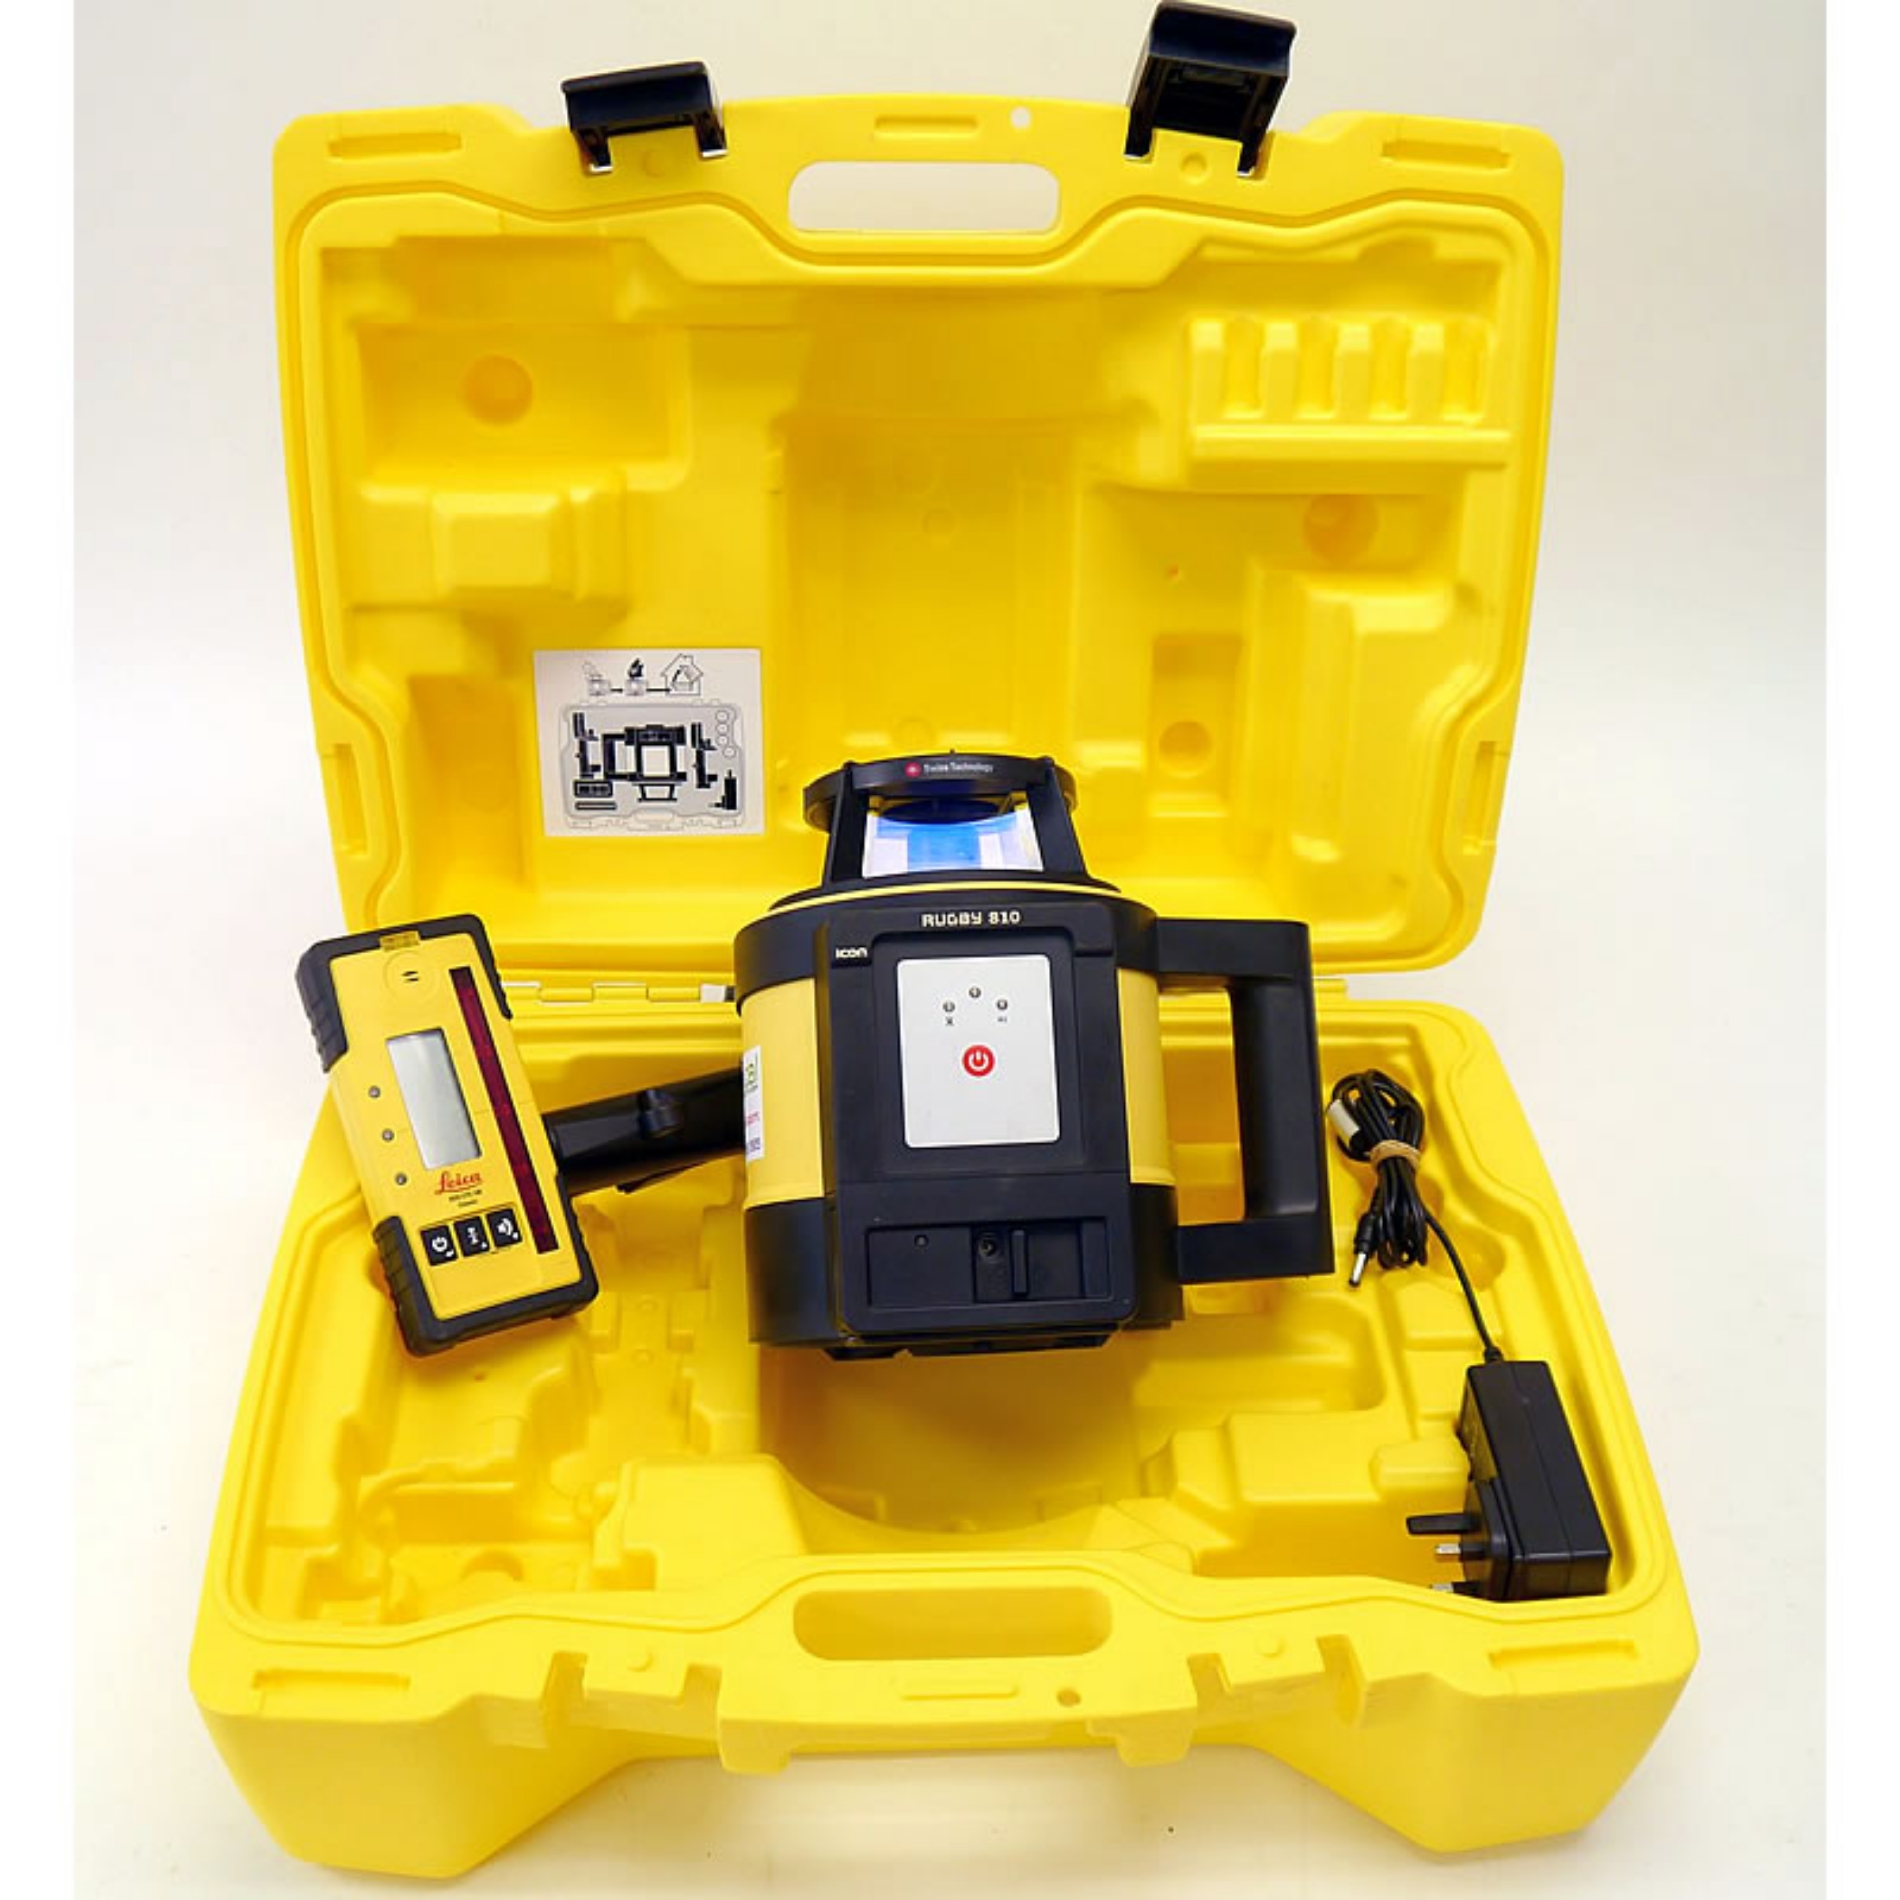 Picture of Leica Rugby 810 Laser Level - Used